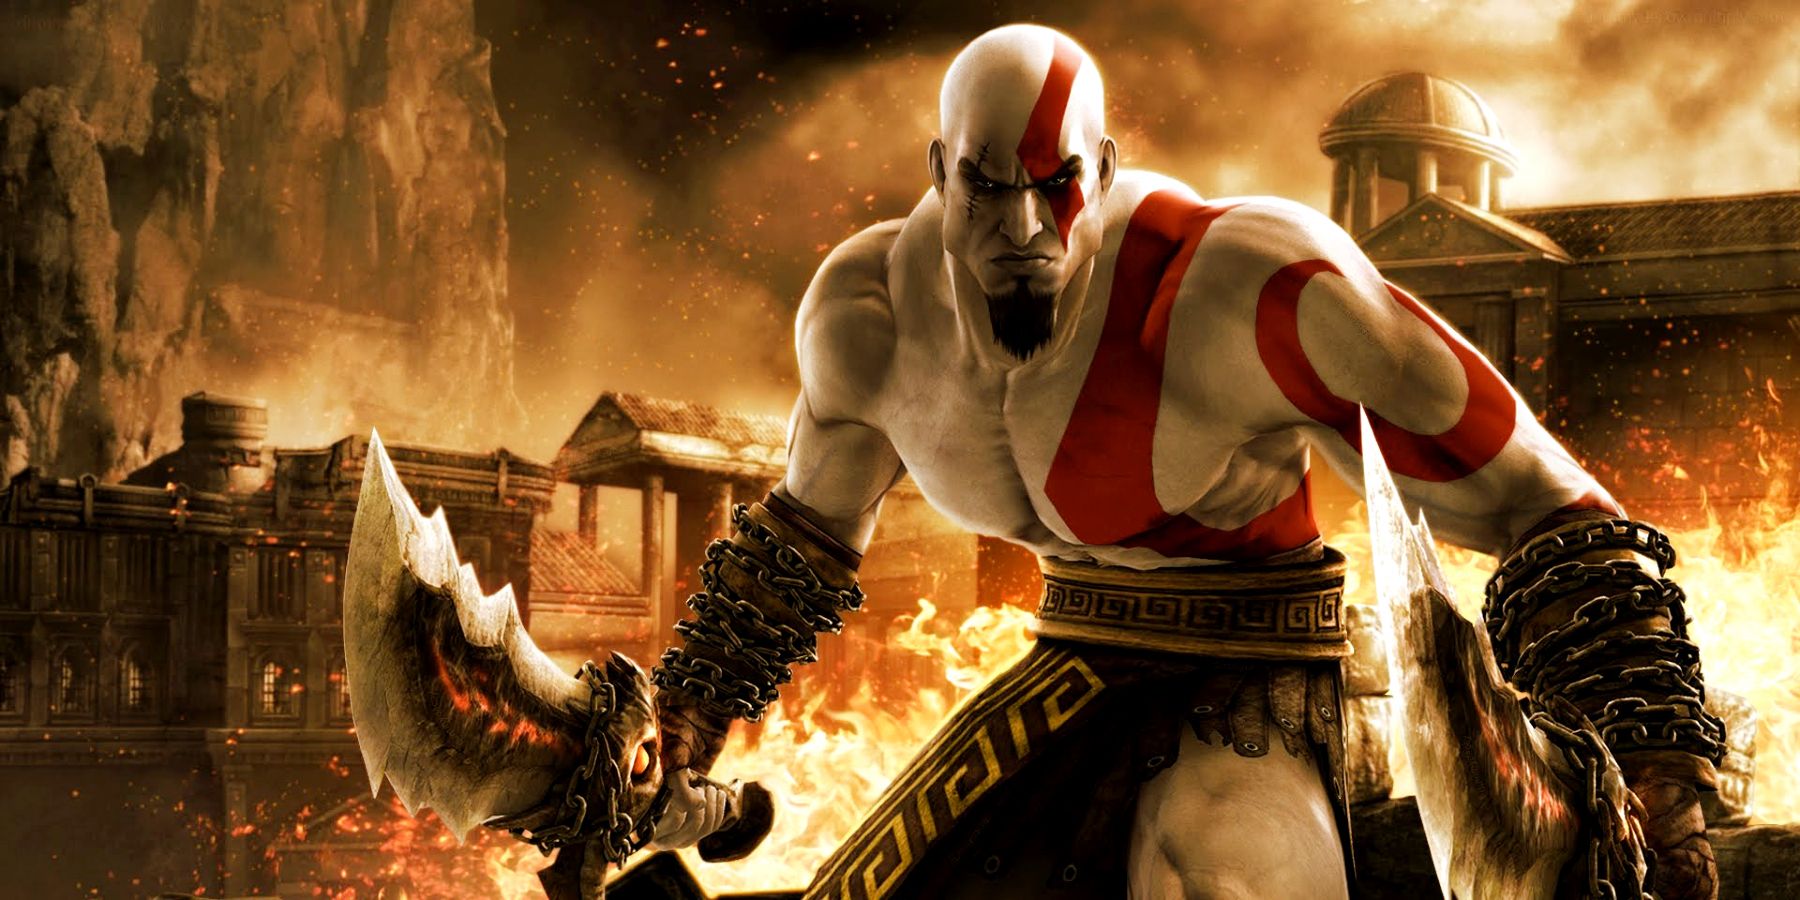 God Of War Timeline: Where Chains Of Olympus & Ghost Of Sparta Fit